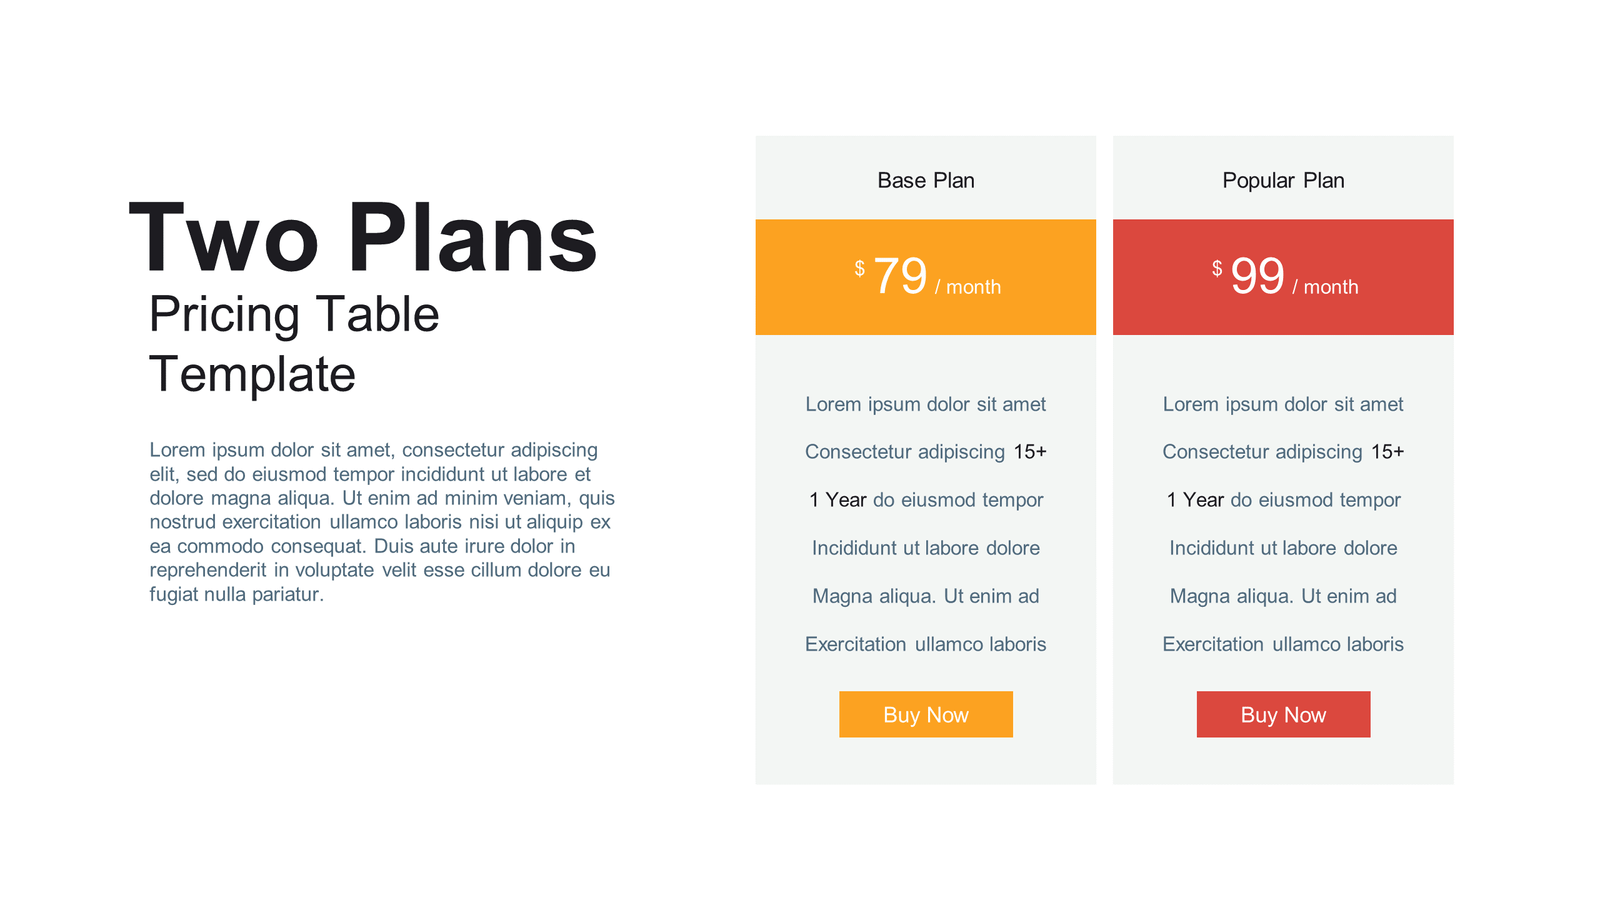 Two Plans Pricing Table Presentation Template by SlidesGeek